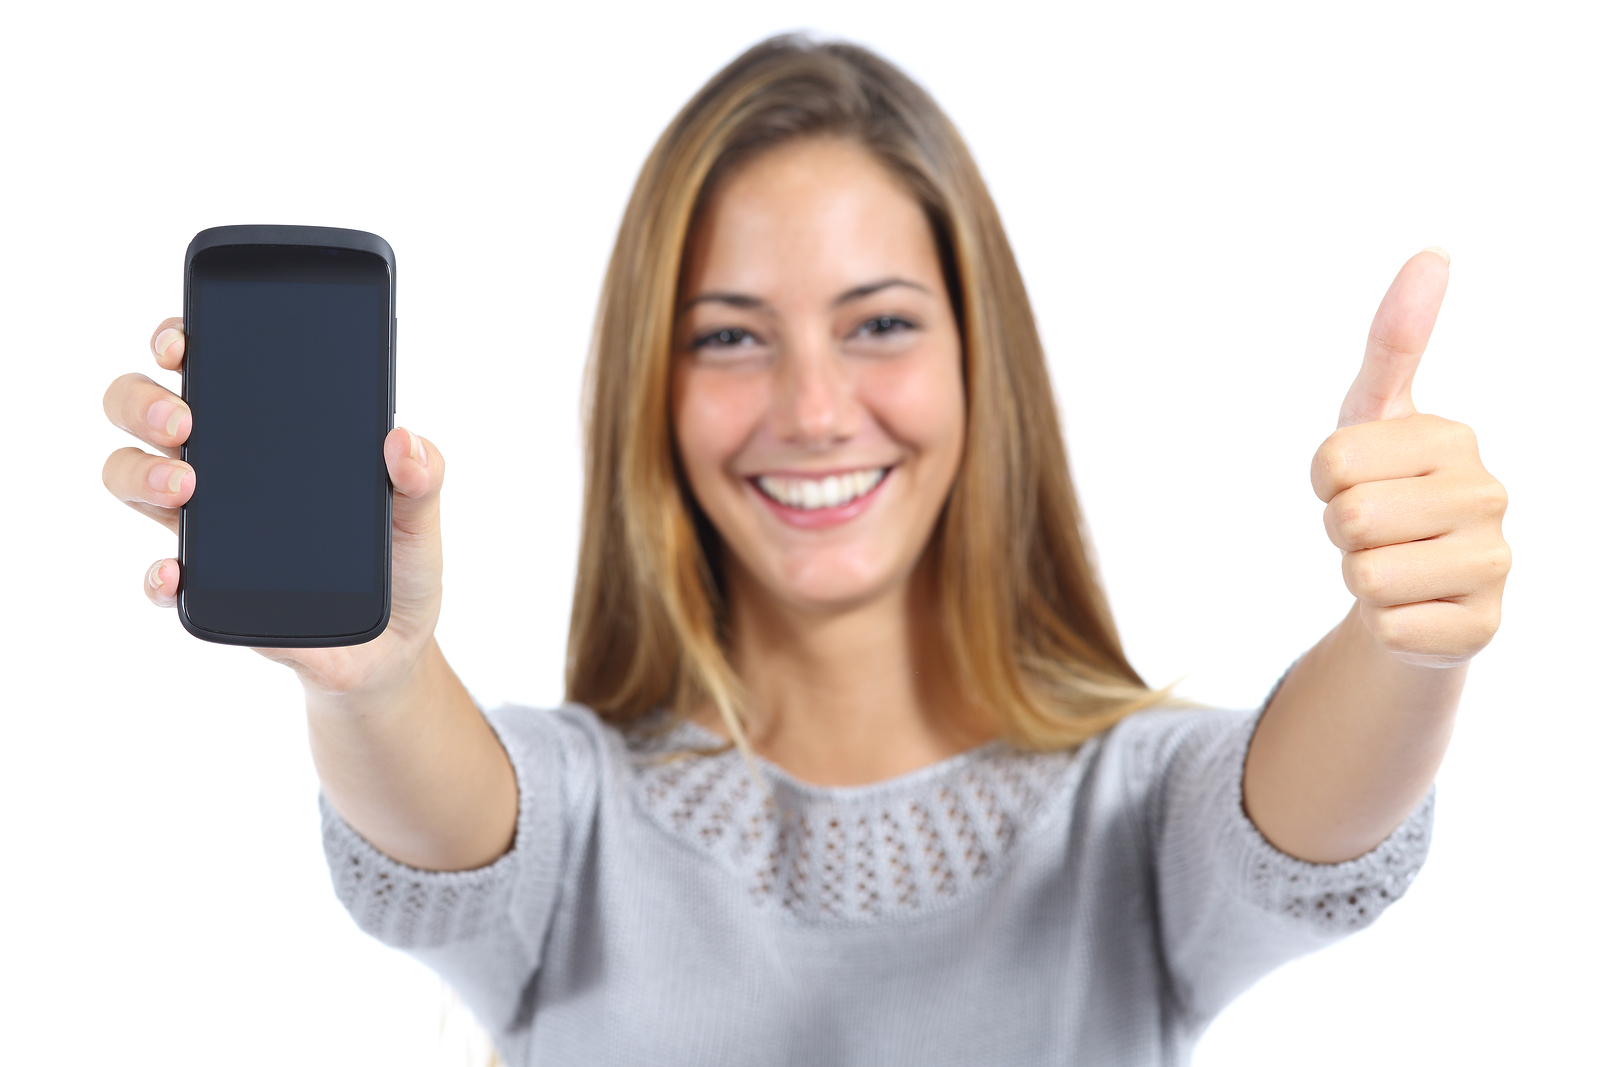 Android smartphone Woman Showing A Smartphone With Thumb Up